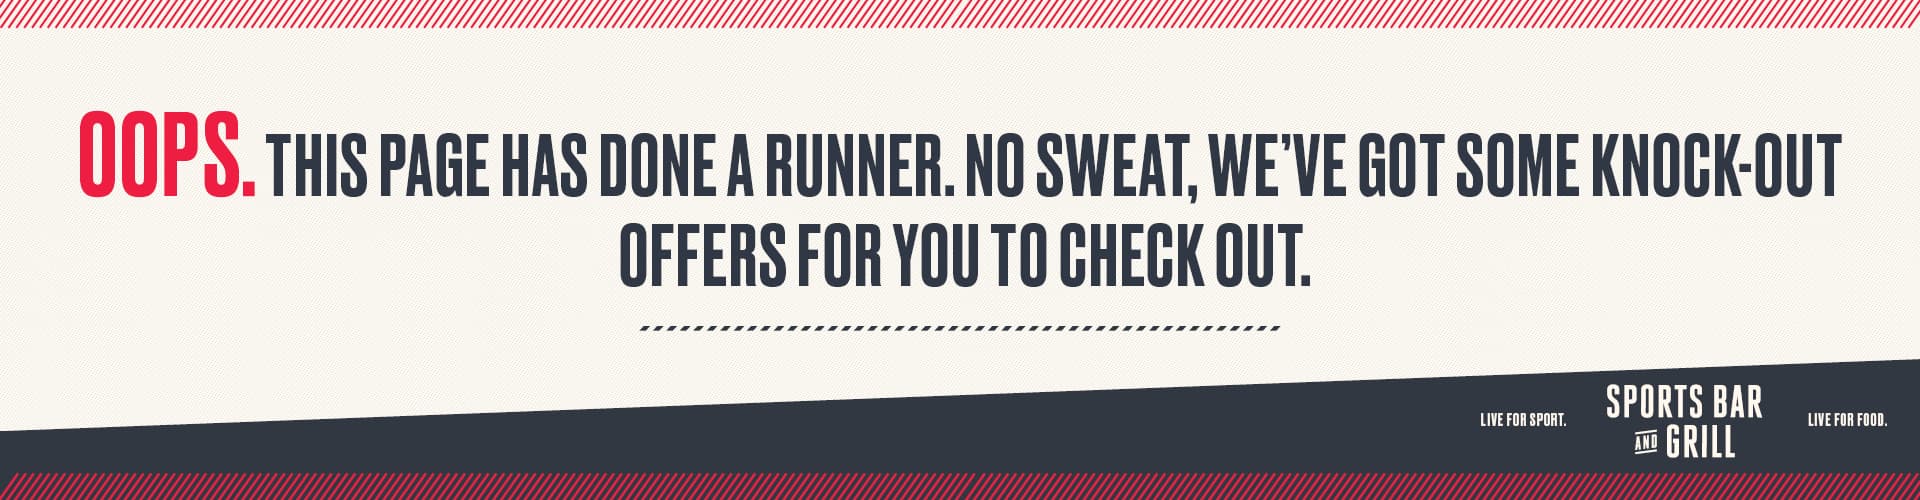 Oops. This page has done a runner. No sweat, here are some other things to try out.